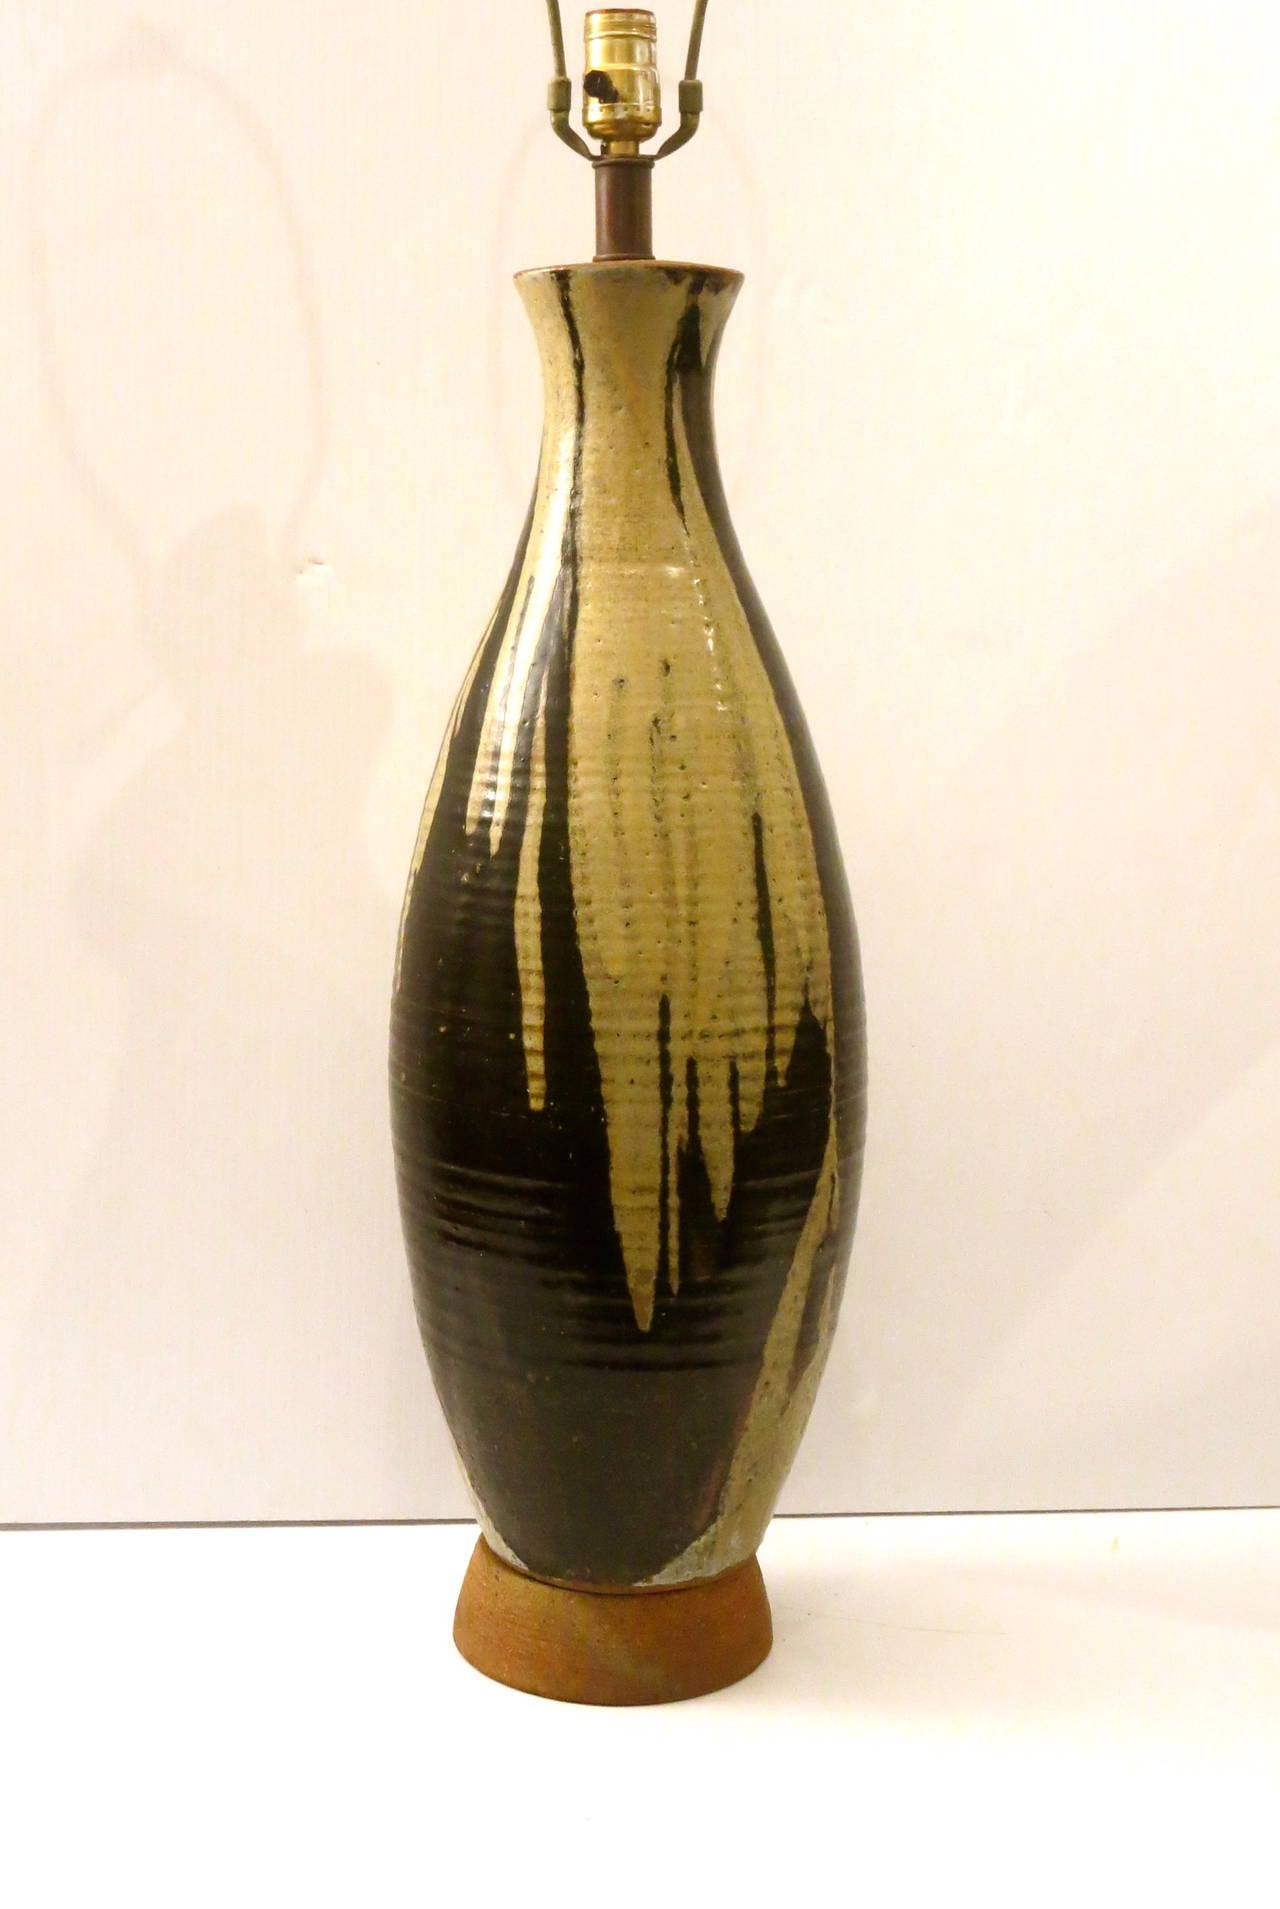 Striking tall table pottery lamp by famous San Diego potter, Wayne Chapman beautiful glaze colors and shape, even the bottom base its made of pottery, label and his signature are impress on the base. Excellent condition no chips or cracks, and